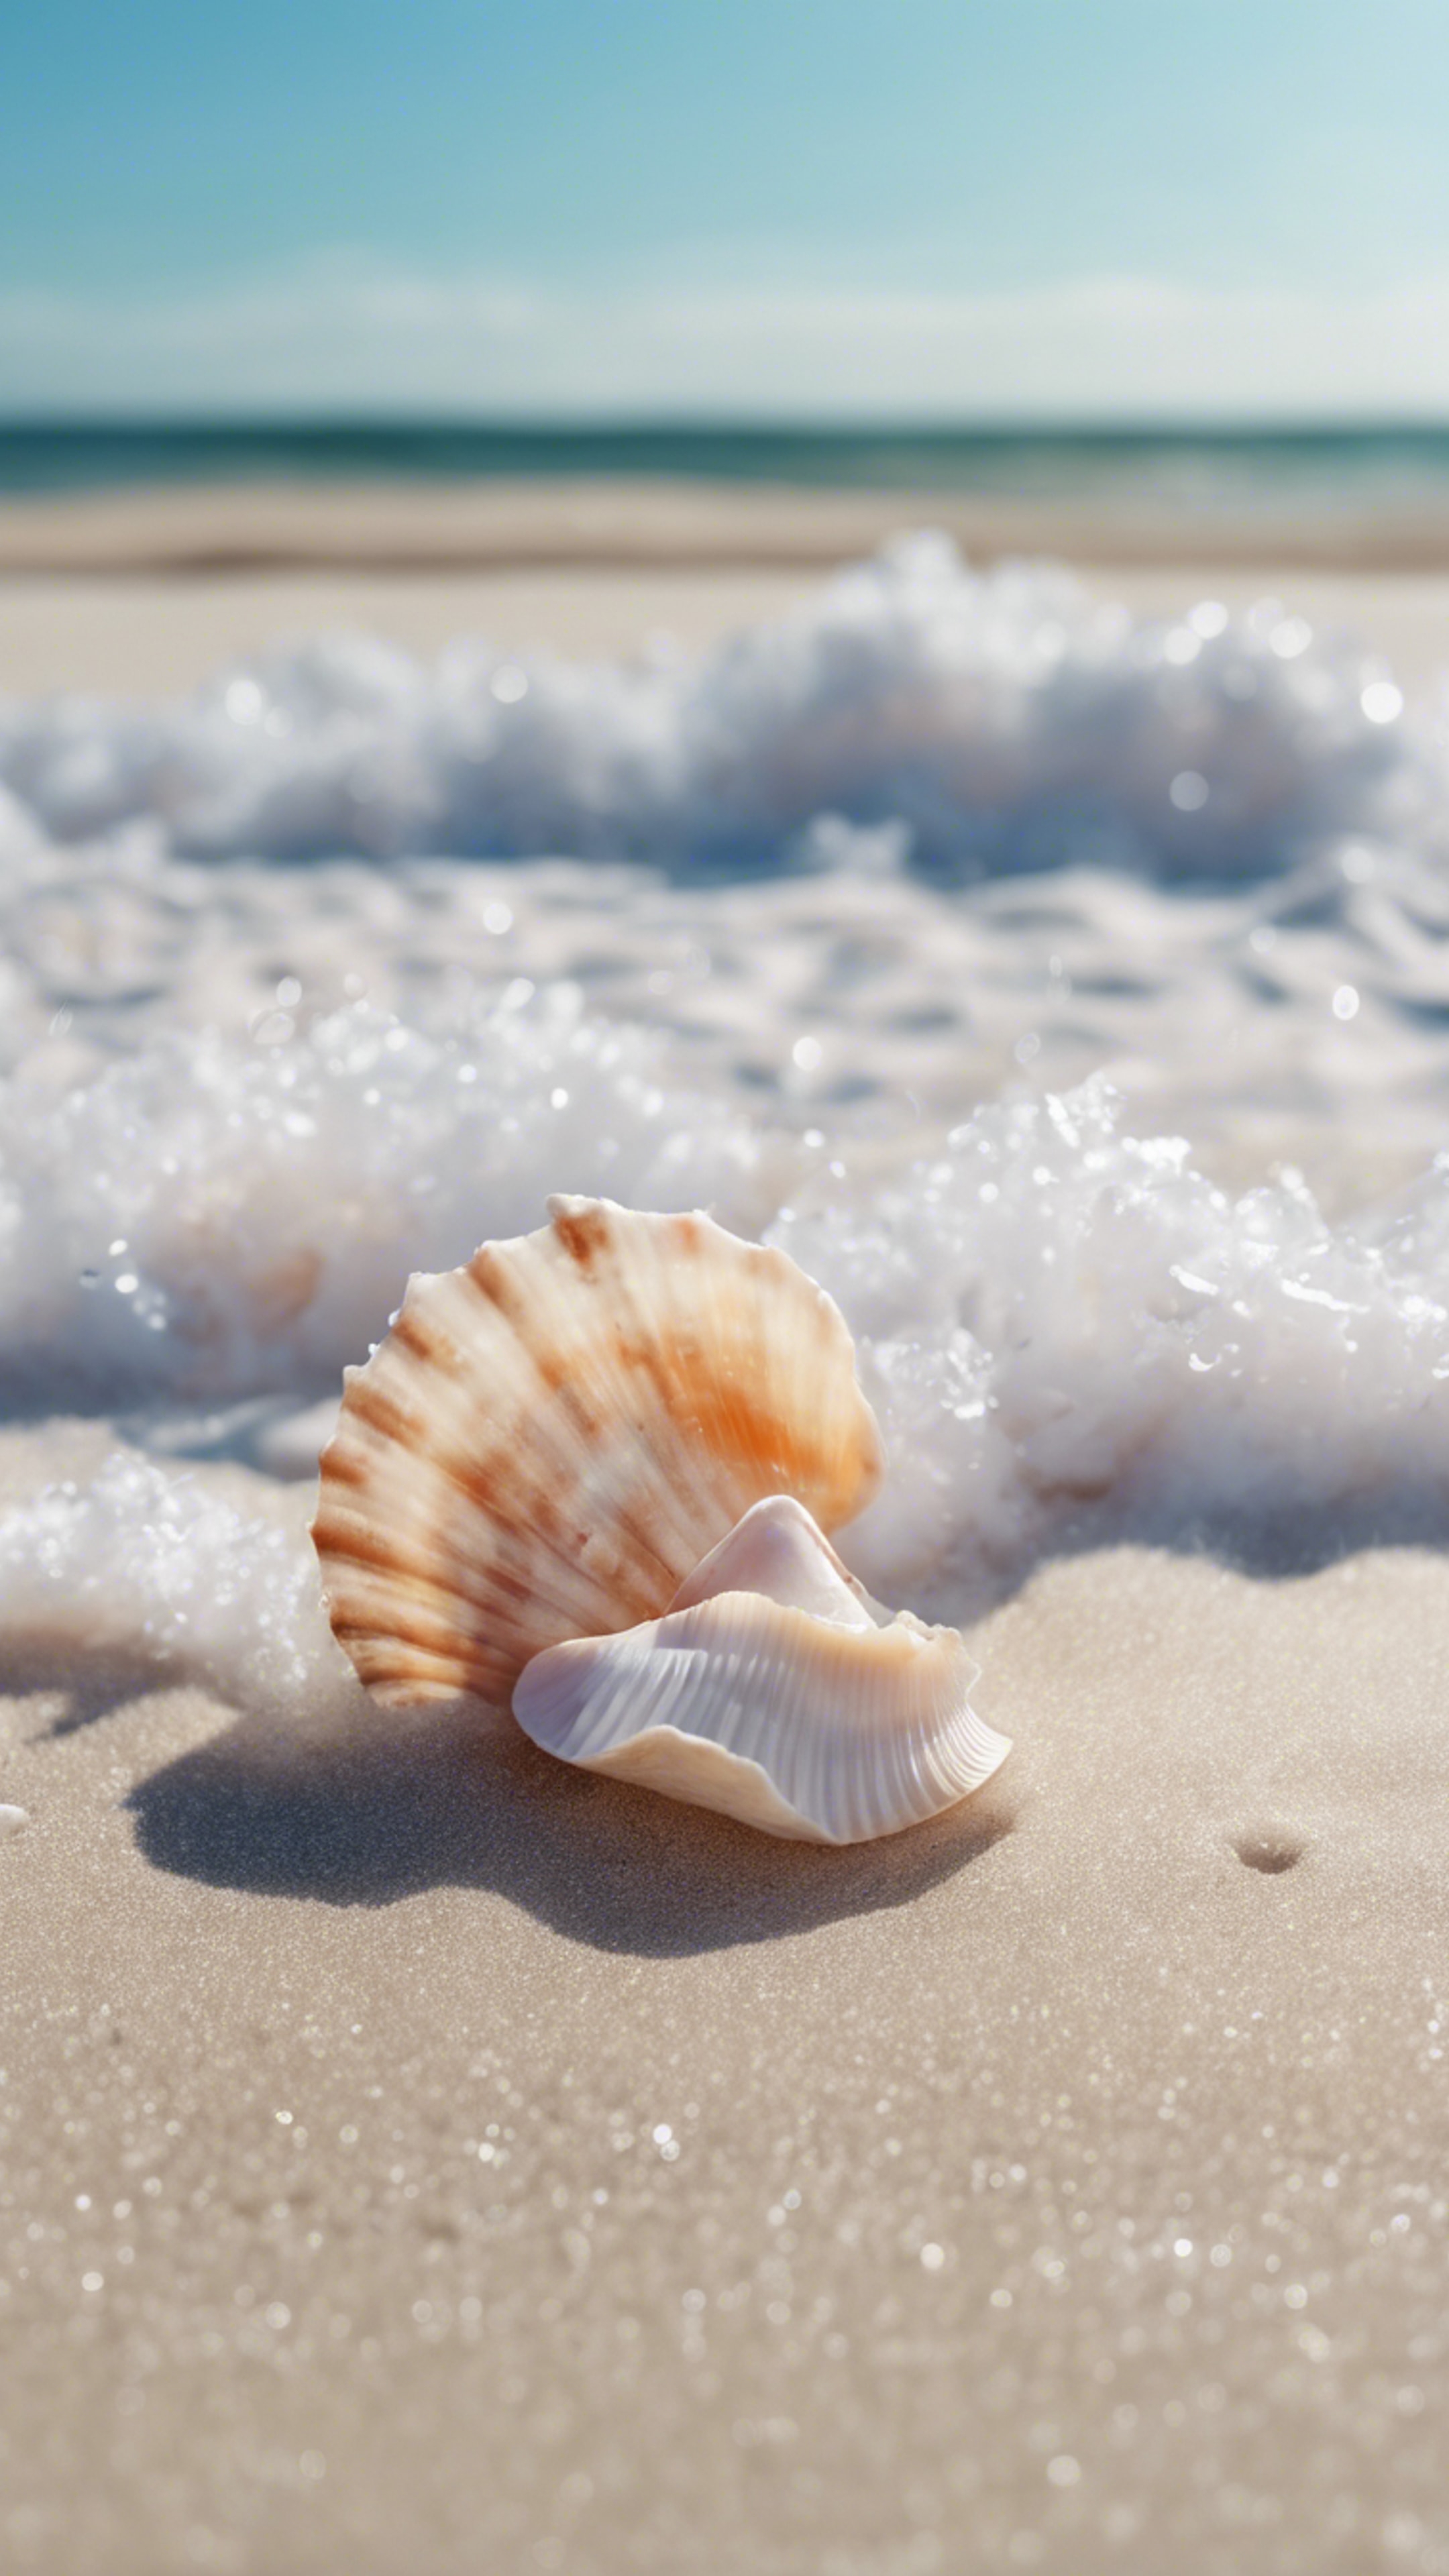 A wave washing ashore under a pastel blue sky, seashells scattered in white sand. Tapet[00bc1dd8280e4c80977e]